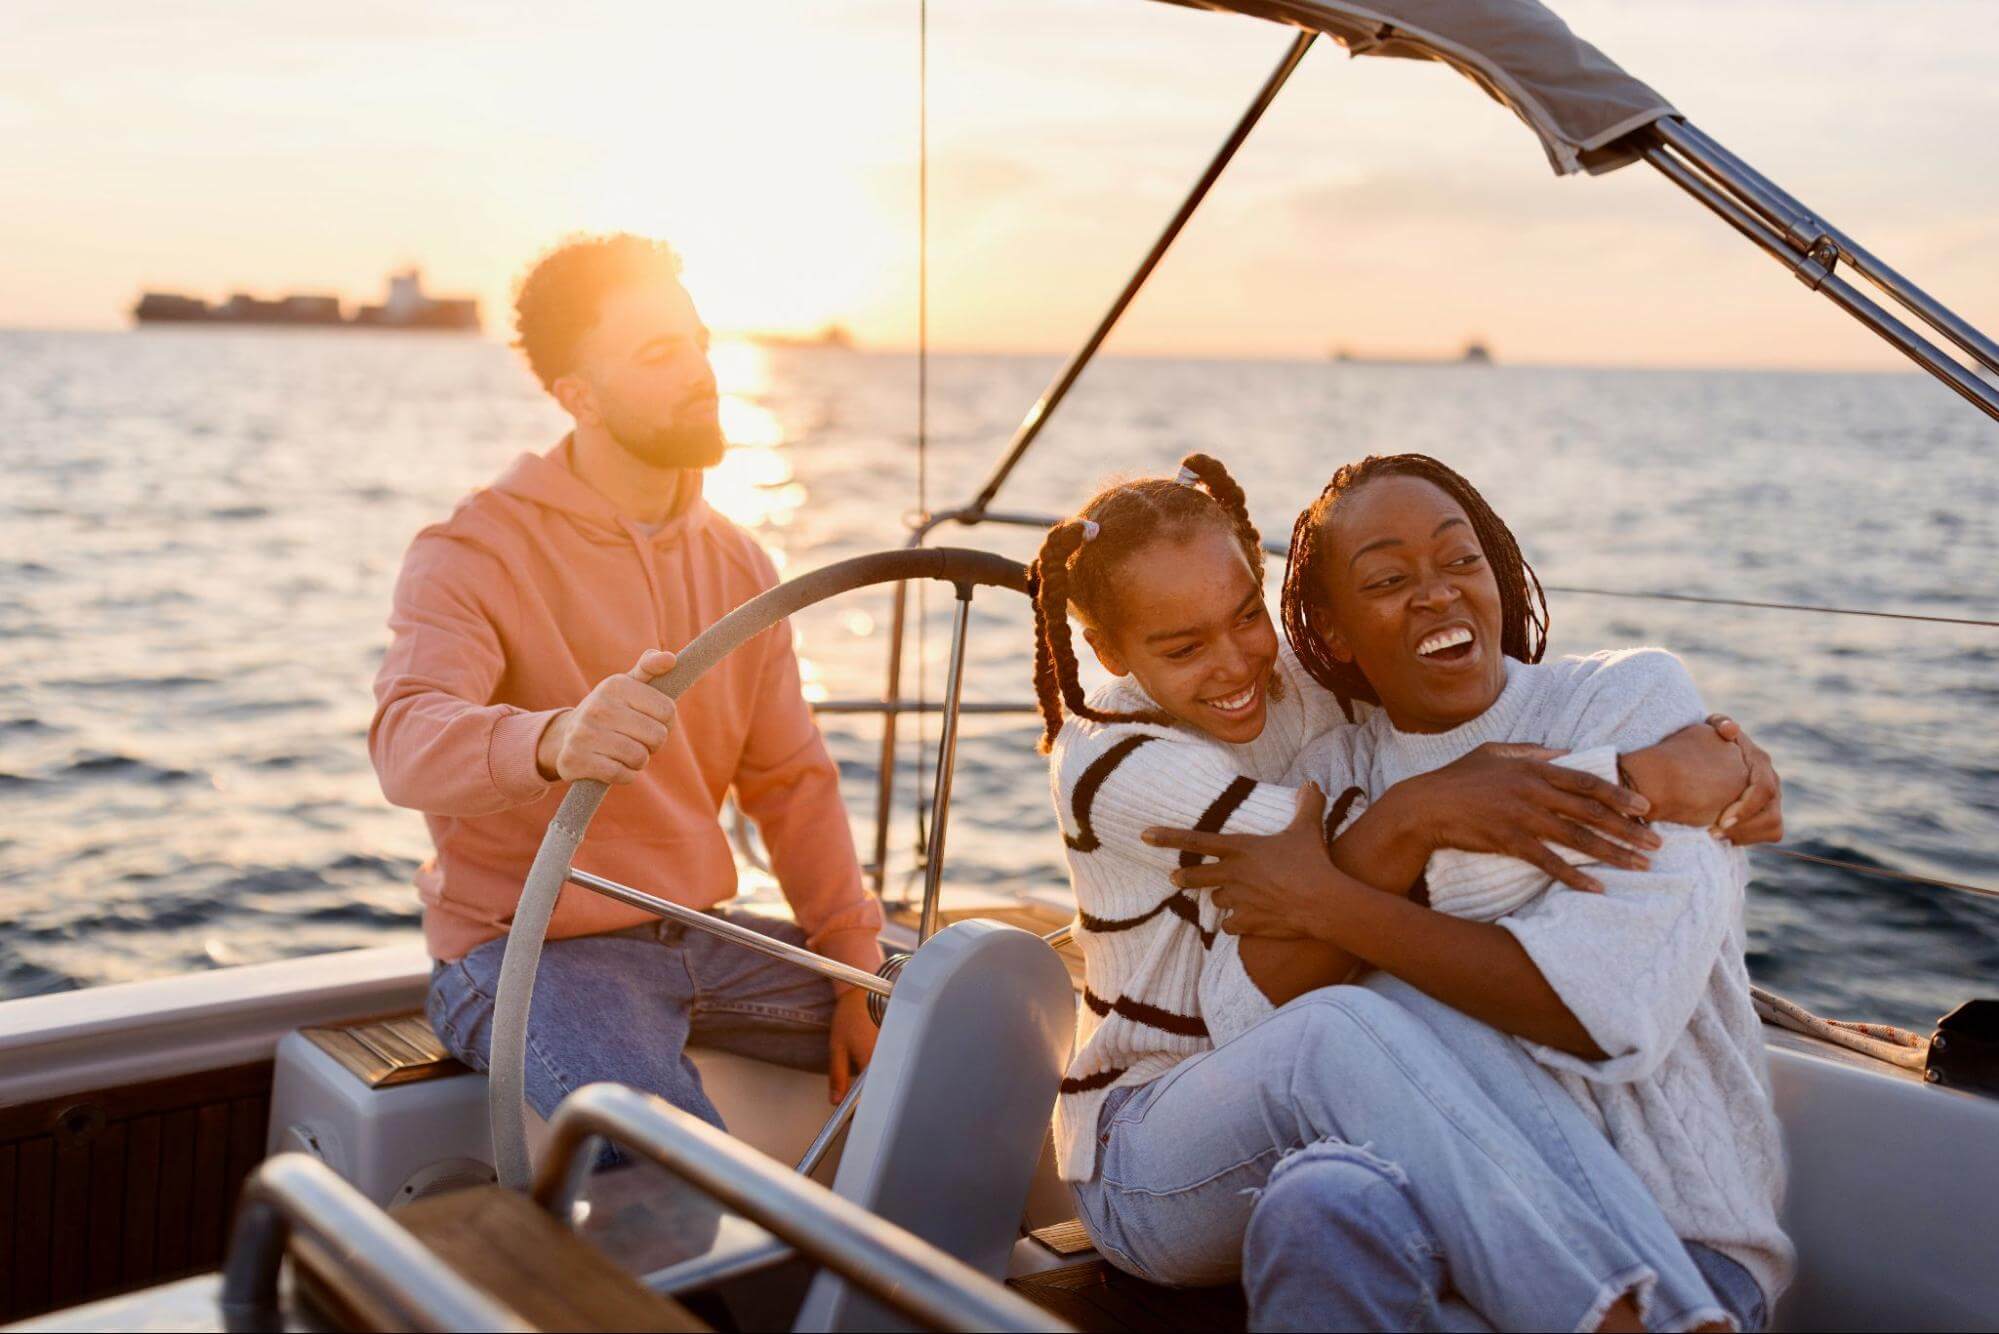 Family on a sailboat at sunset - family stock pictures and royalty-free images.